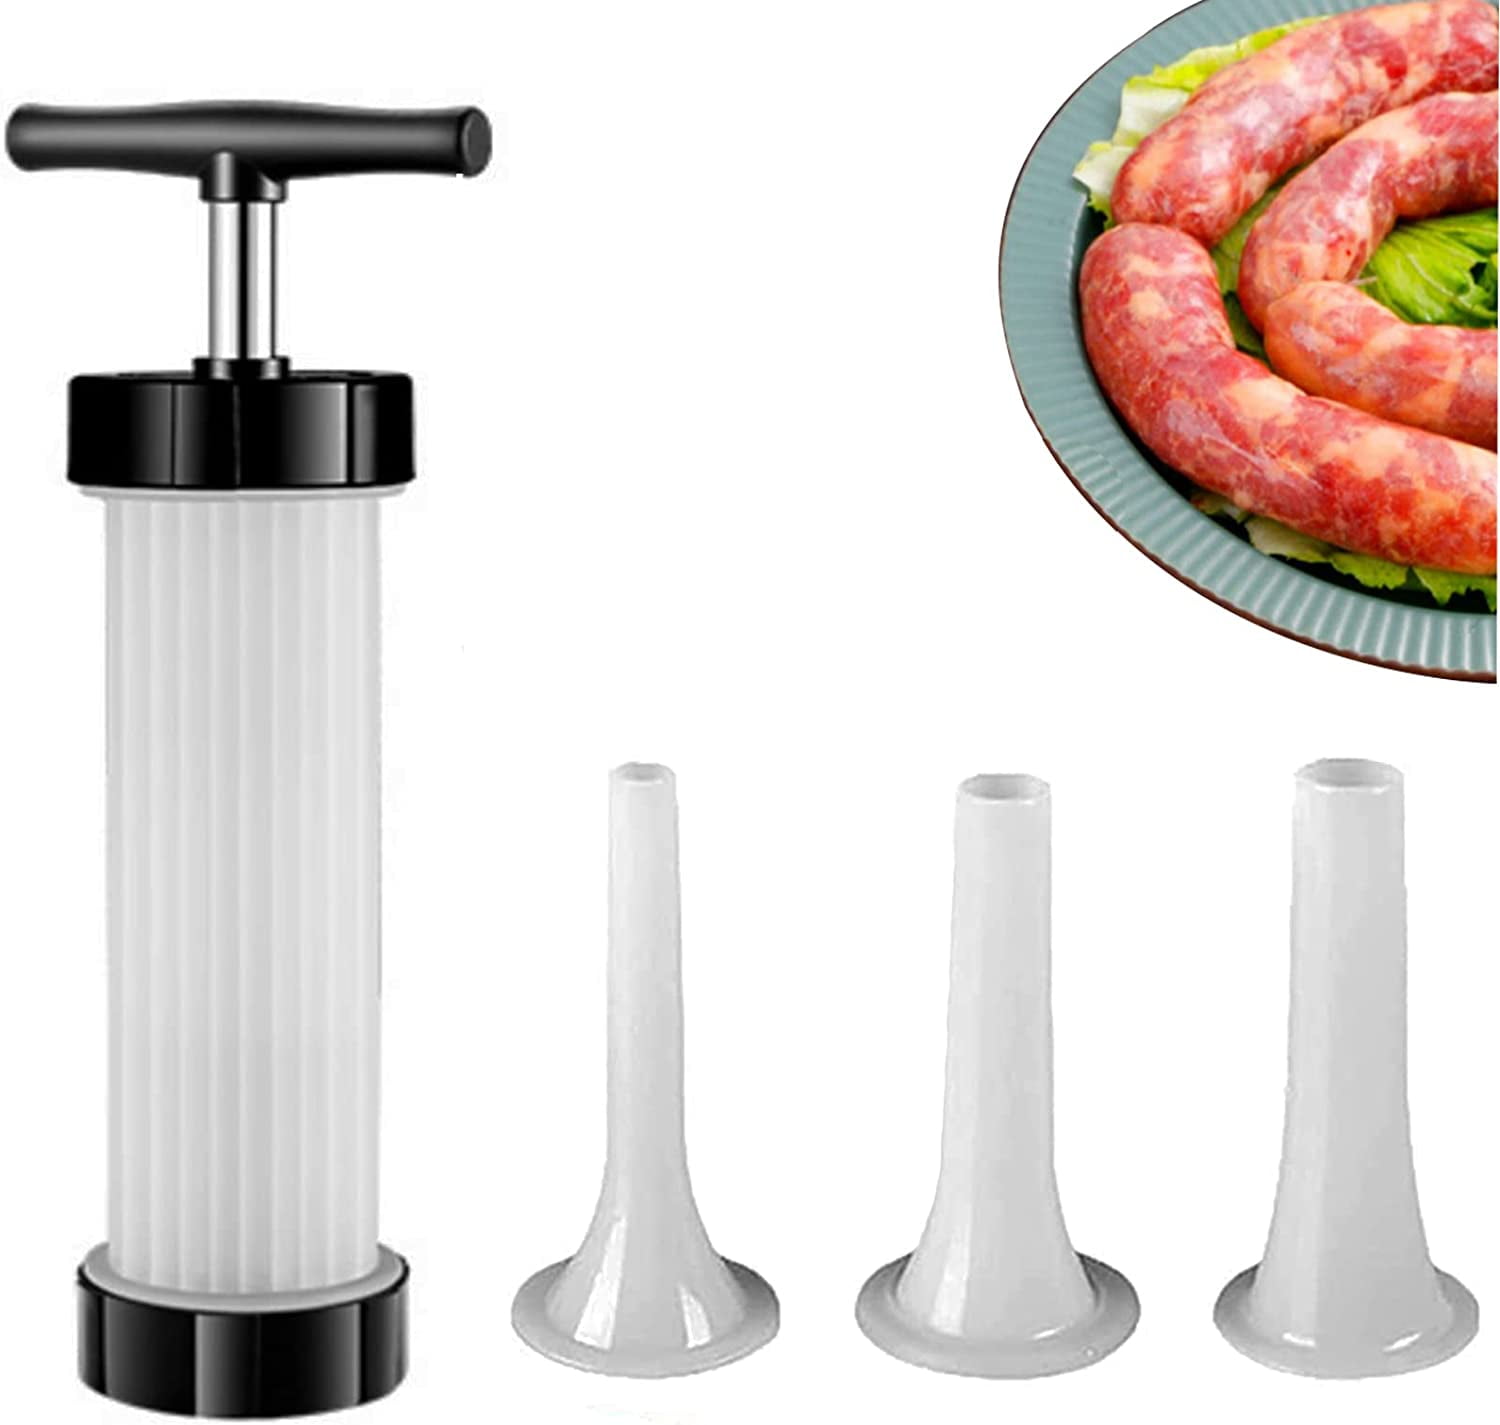 ROVSUN 15.4LBS/10L Electric Sausage Stuffer, Adjustable Speed Stainless  Steel Sausage Maker Meat Stuffer, Heavy Duty Vertical Electric Stuffer  Sausage Filler with 5 Stuffing Tubes, Home & Commercial 